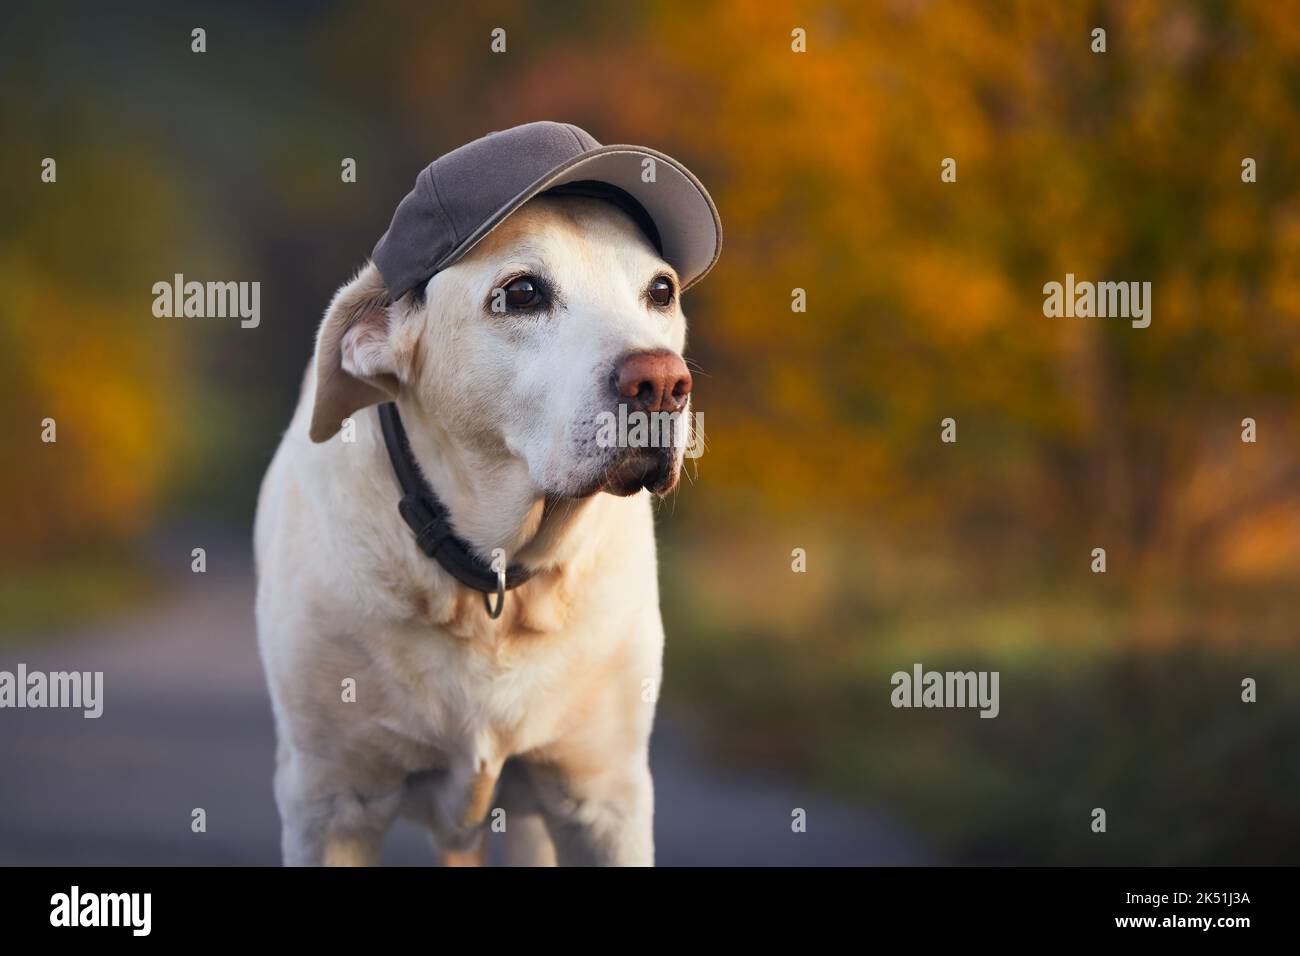 Funny portrait of old dog. Labrador retriever wearing cap during walk in autumn nature. Stock Photo